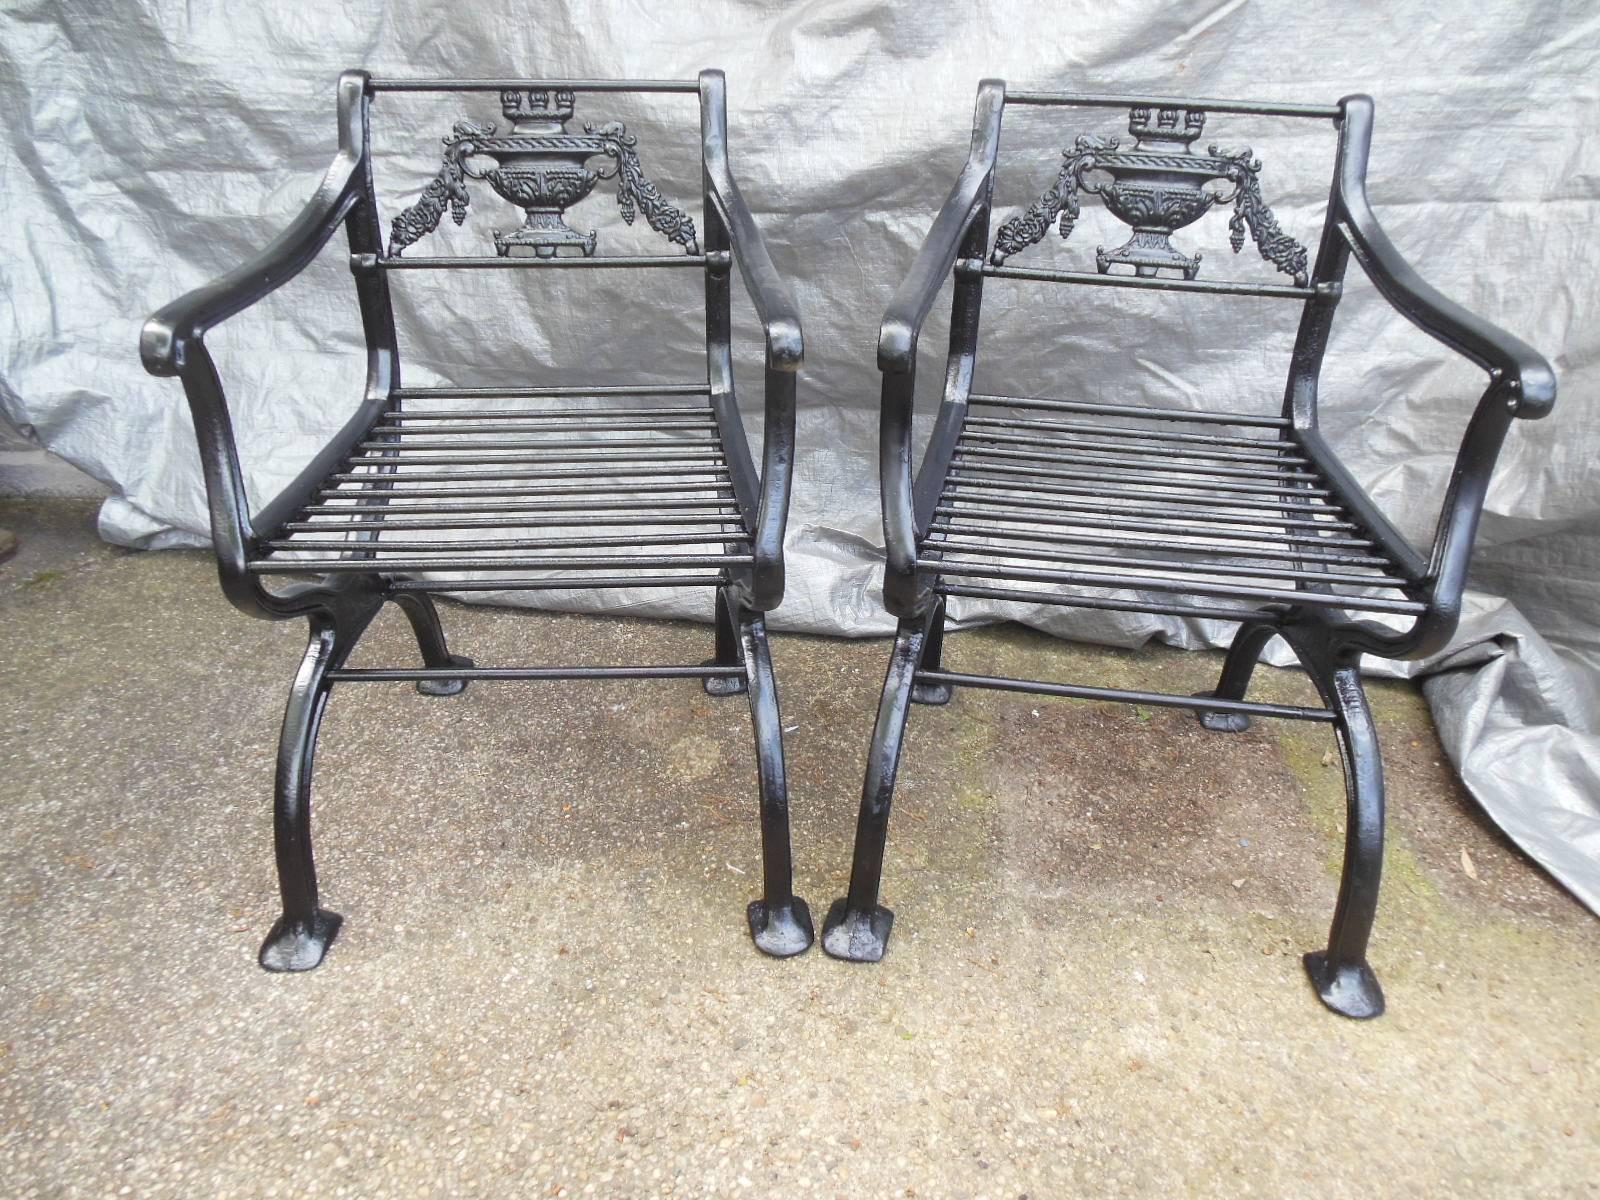 An antique cast iron Regency garden set consisting of a bench and two matching armchairs. The set is inspired by a design circa 1835 by artist Karl Friedrich Schinkel (1781-1841). The armchairs and bench both with rod turned seats. All in excellent